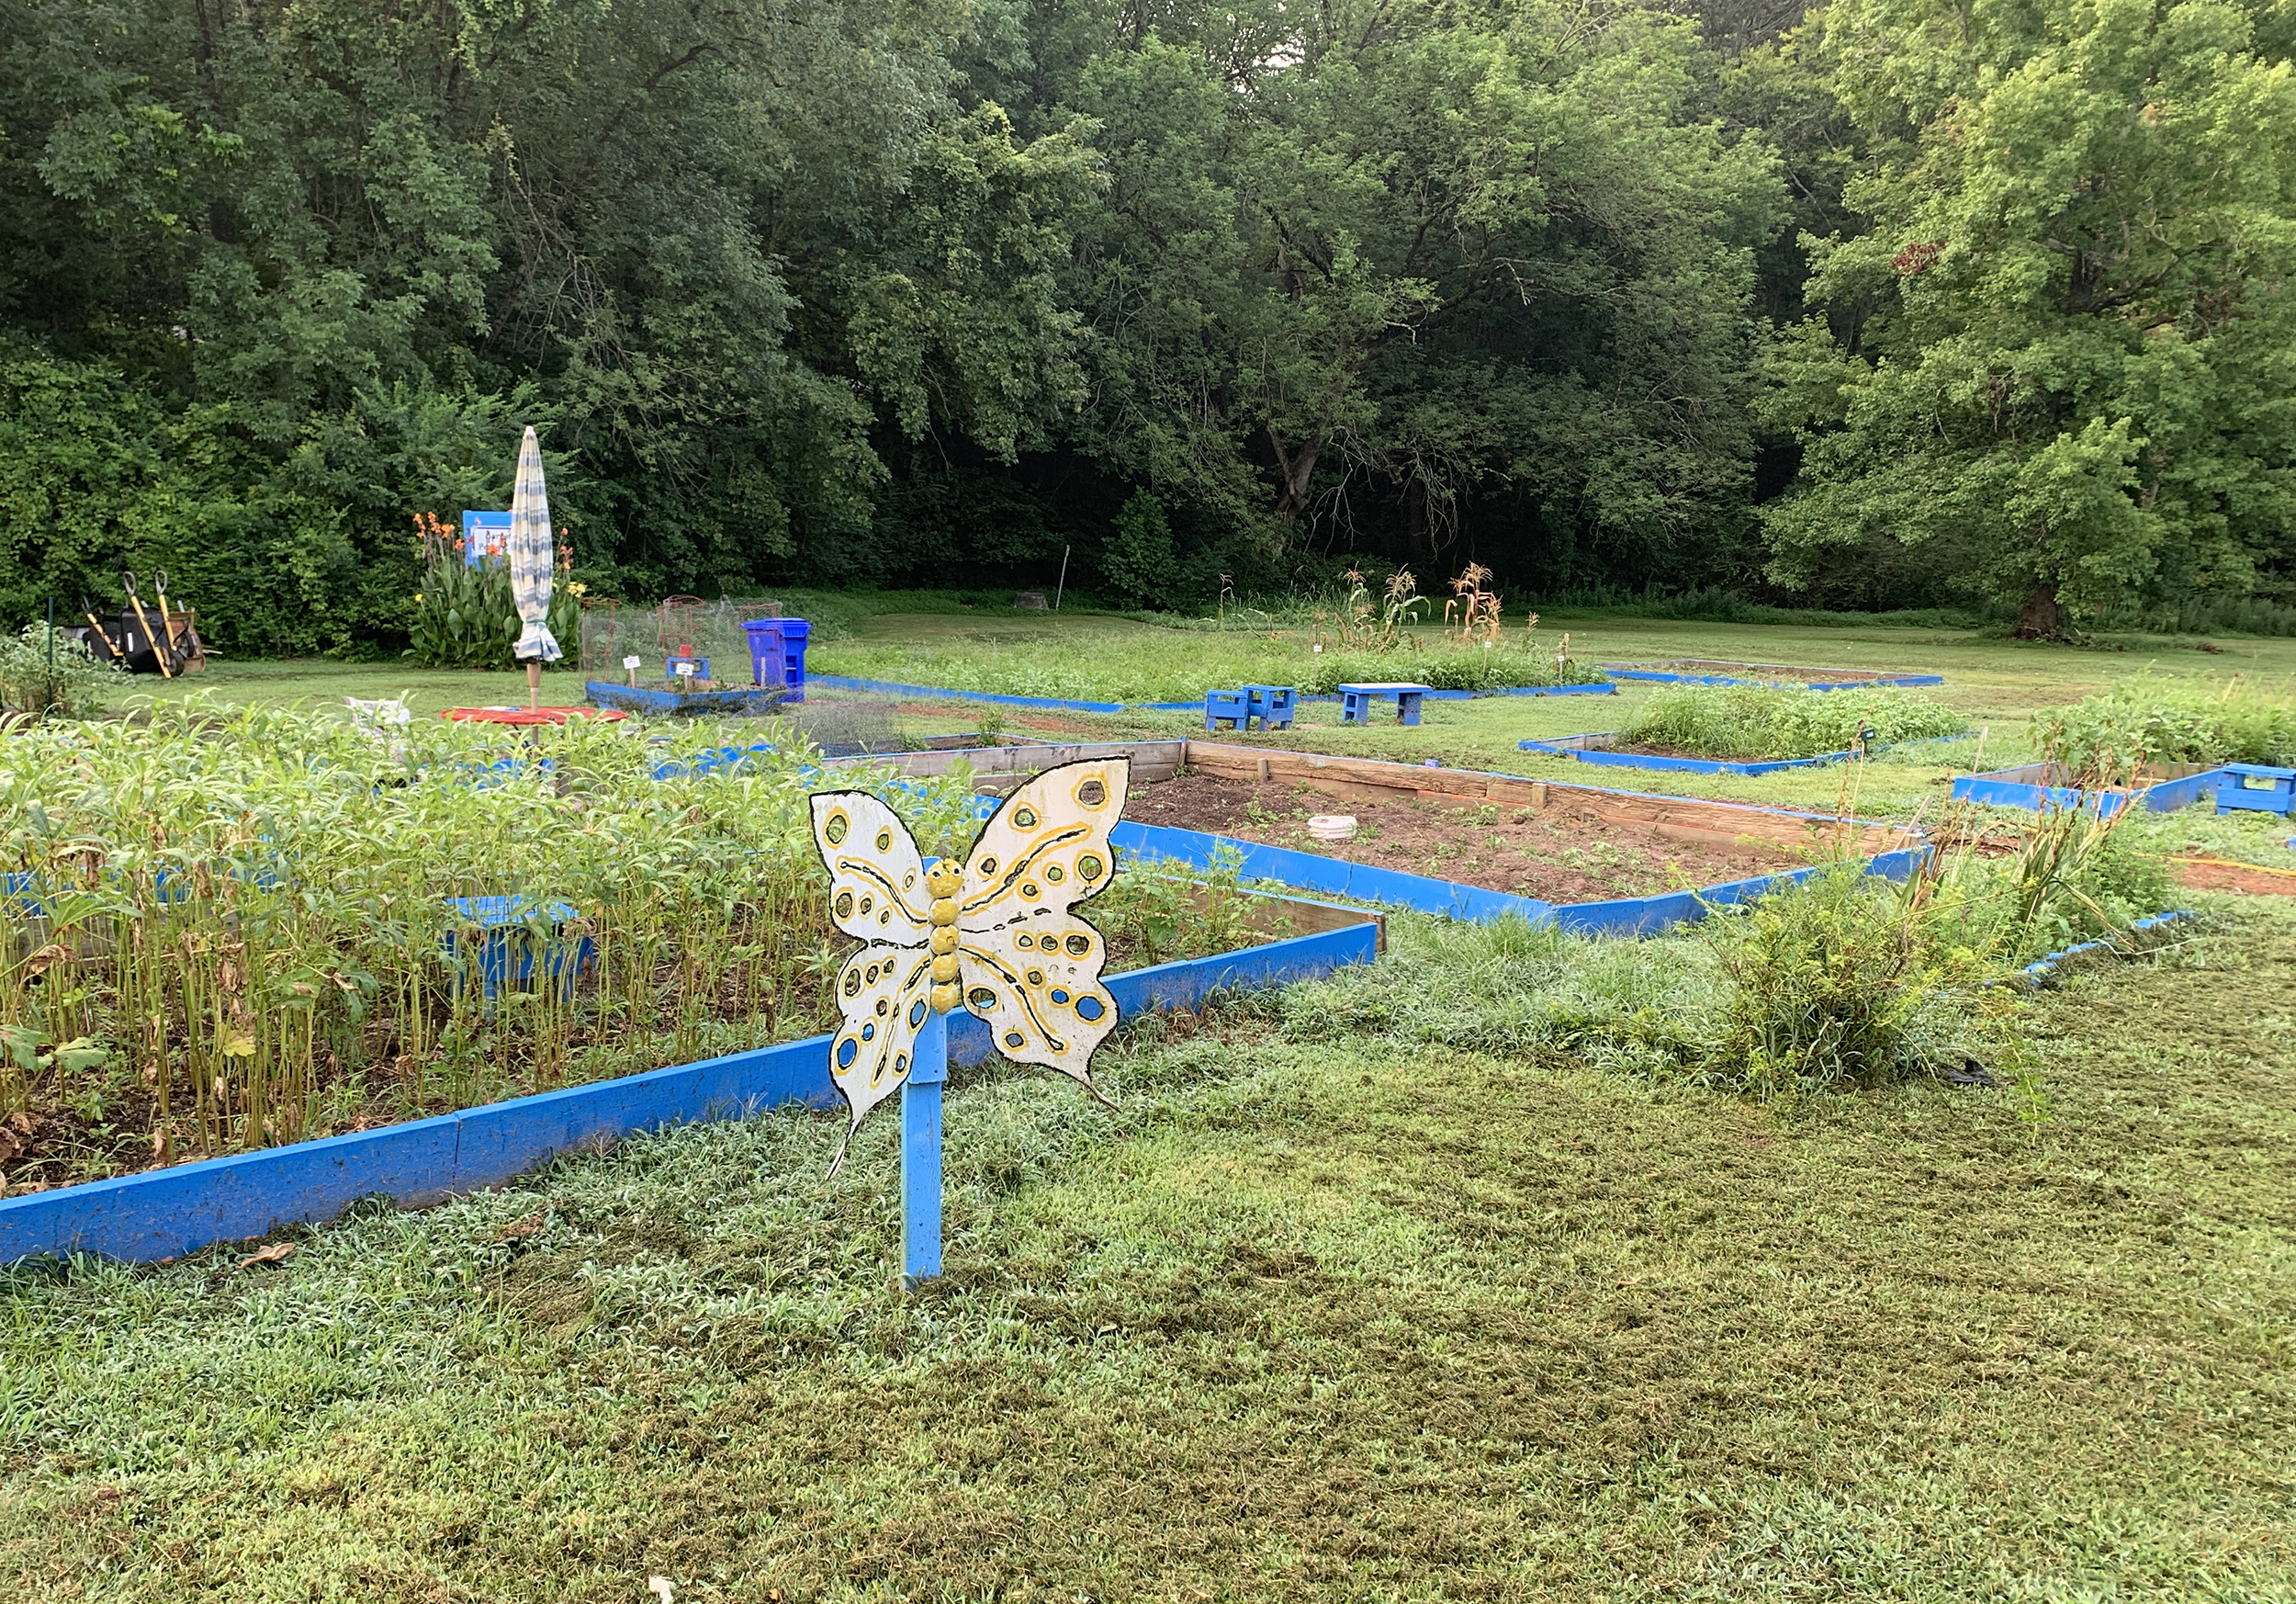 Full picture of local community garden.